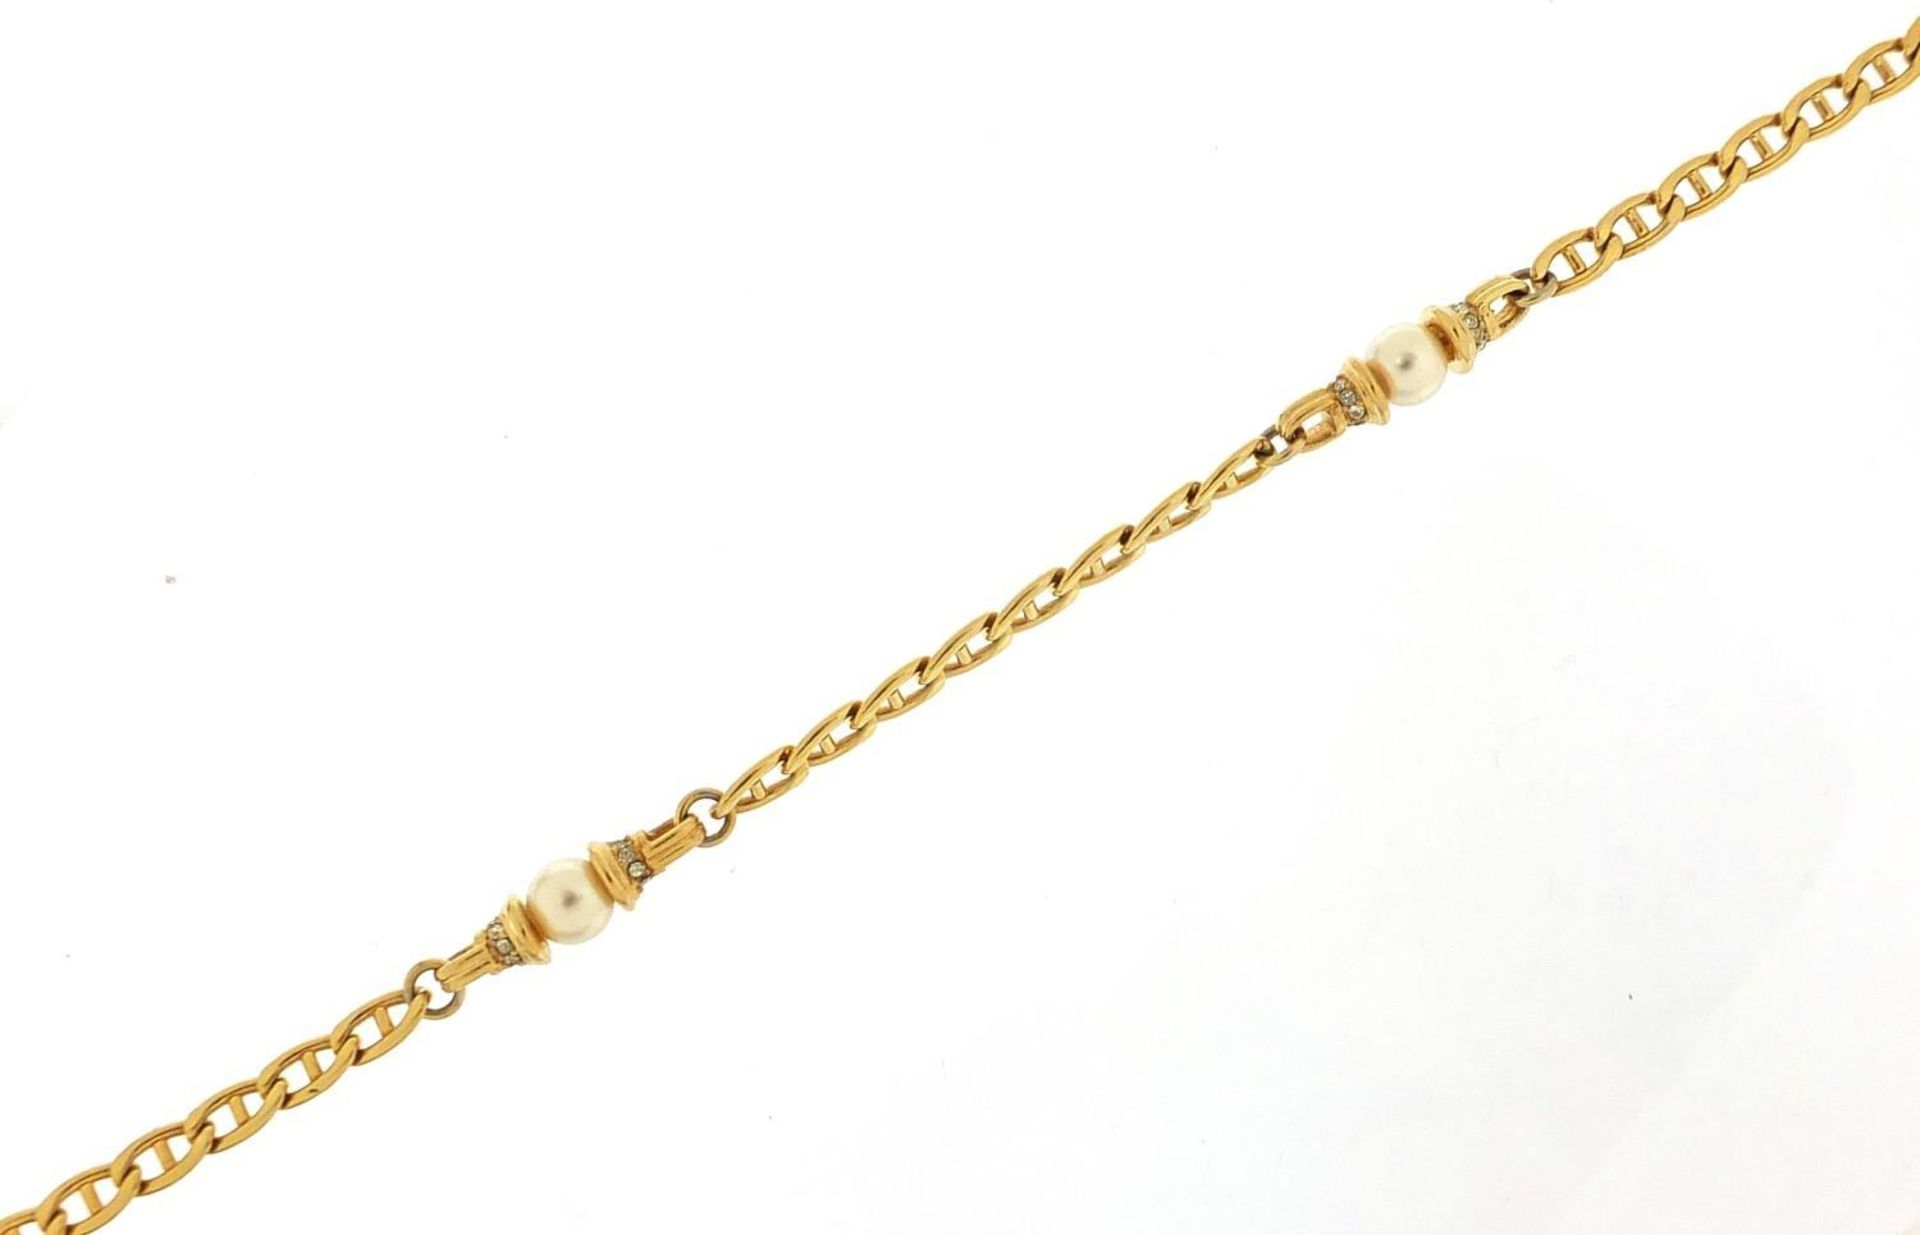 Christian Dior simulated pearl necklace, 80cm in length, 33.2g - Image 2 of 4